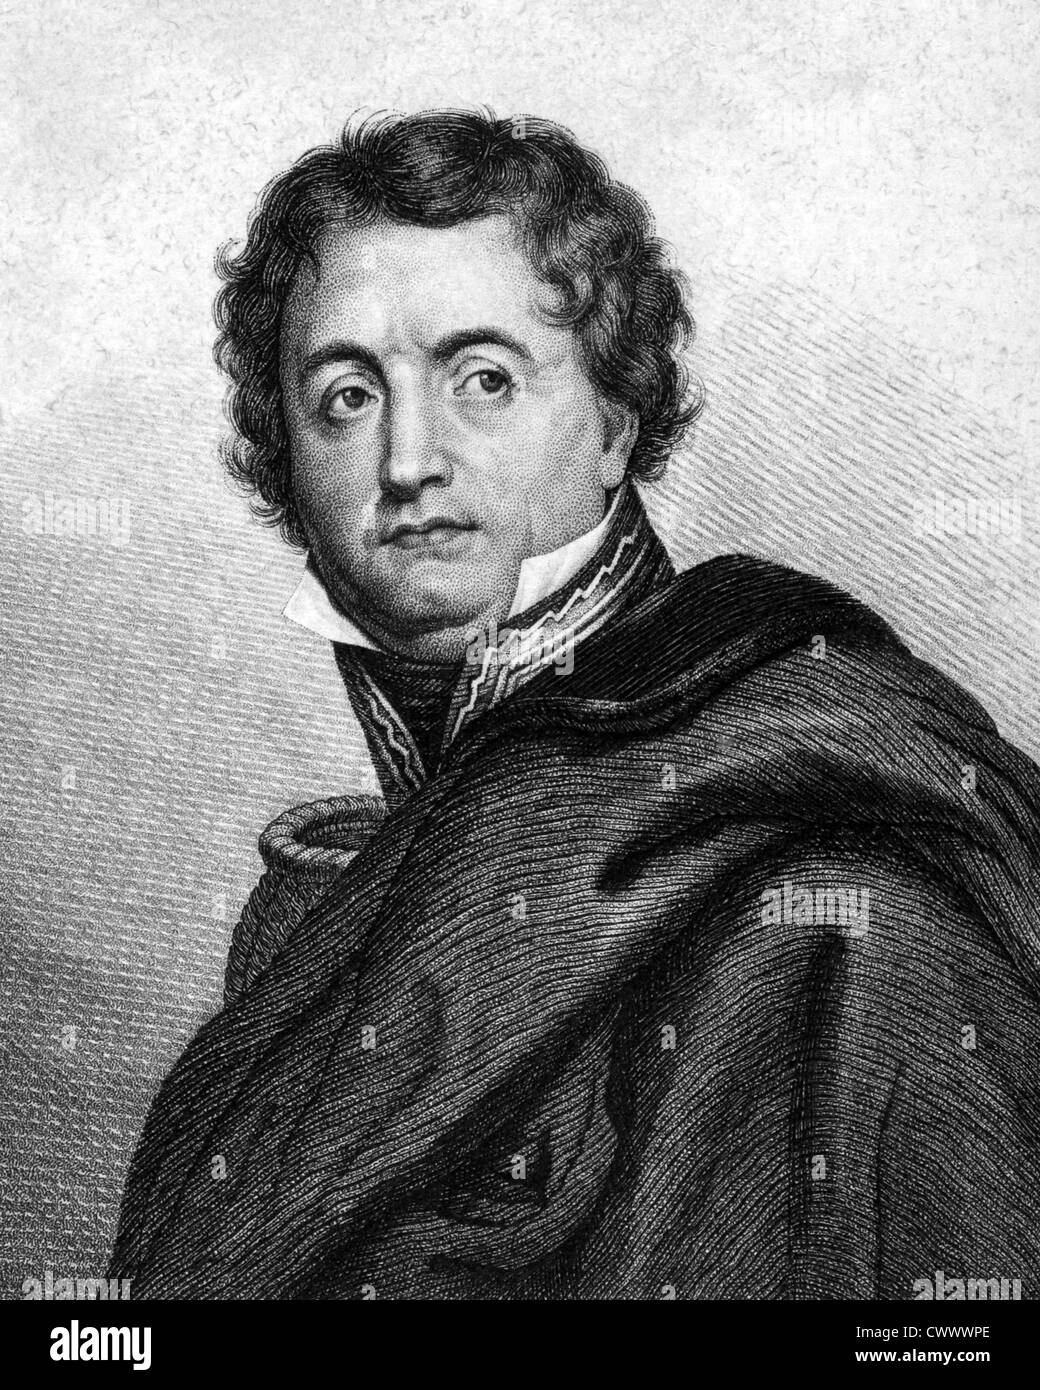 Nicolas Jean-de-Dieu Soult (1769-1851) on engraving from 1859. French general and statesman. Stock Photo